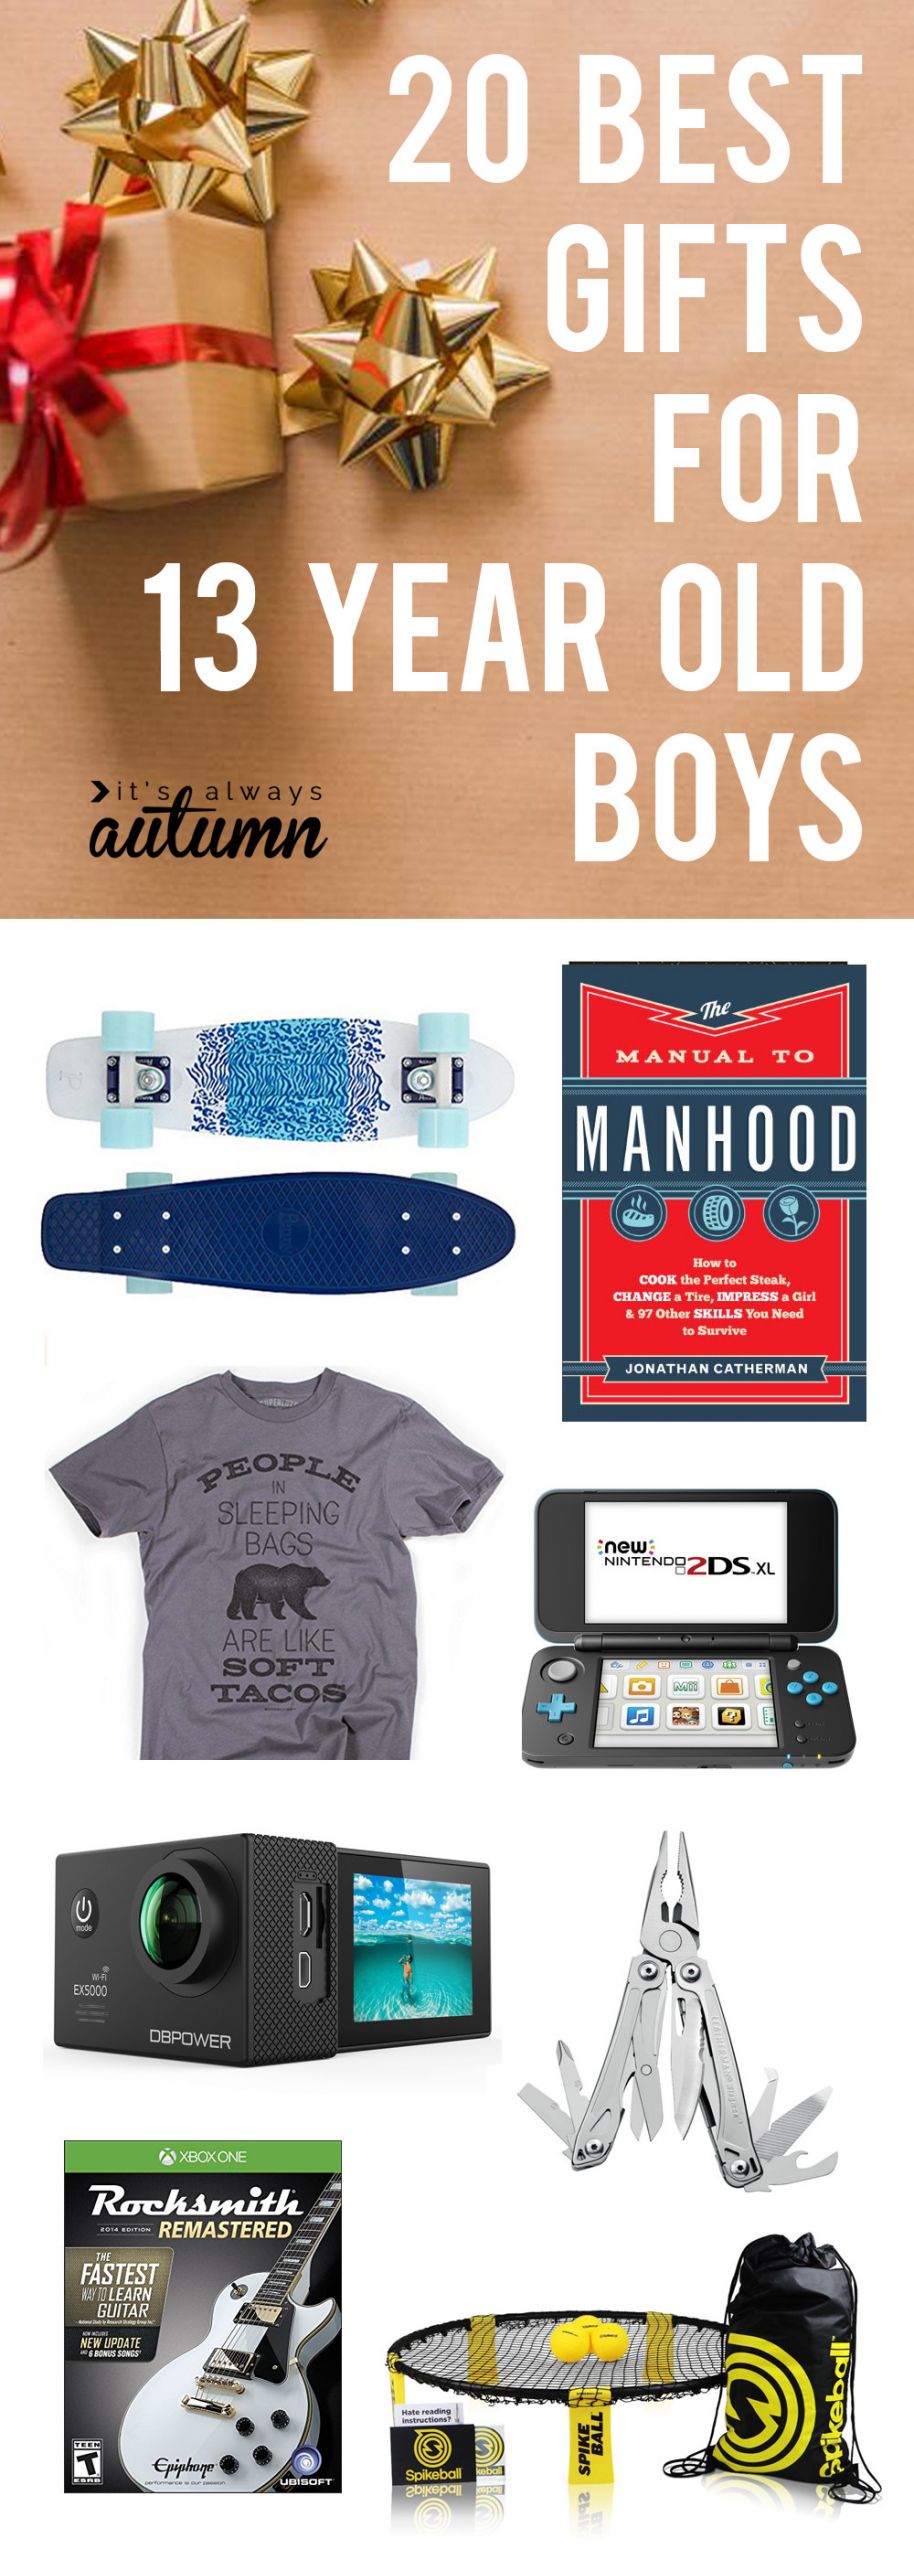 Birthday Gift Ideas 13 Year Old Boy
 best Christmas ts for 13 year old boys It s Always Autumn